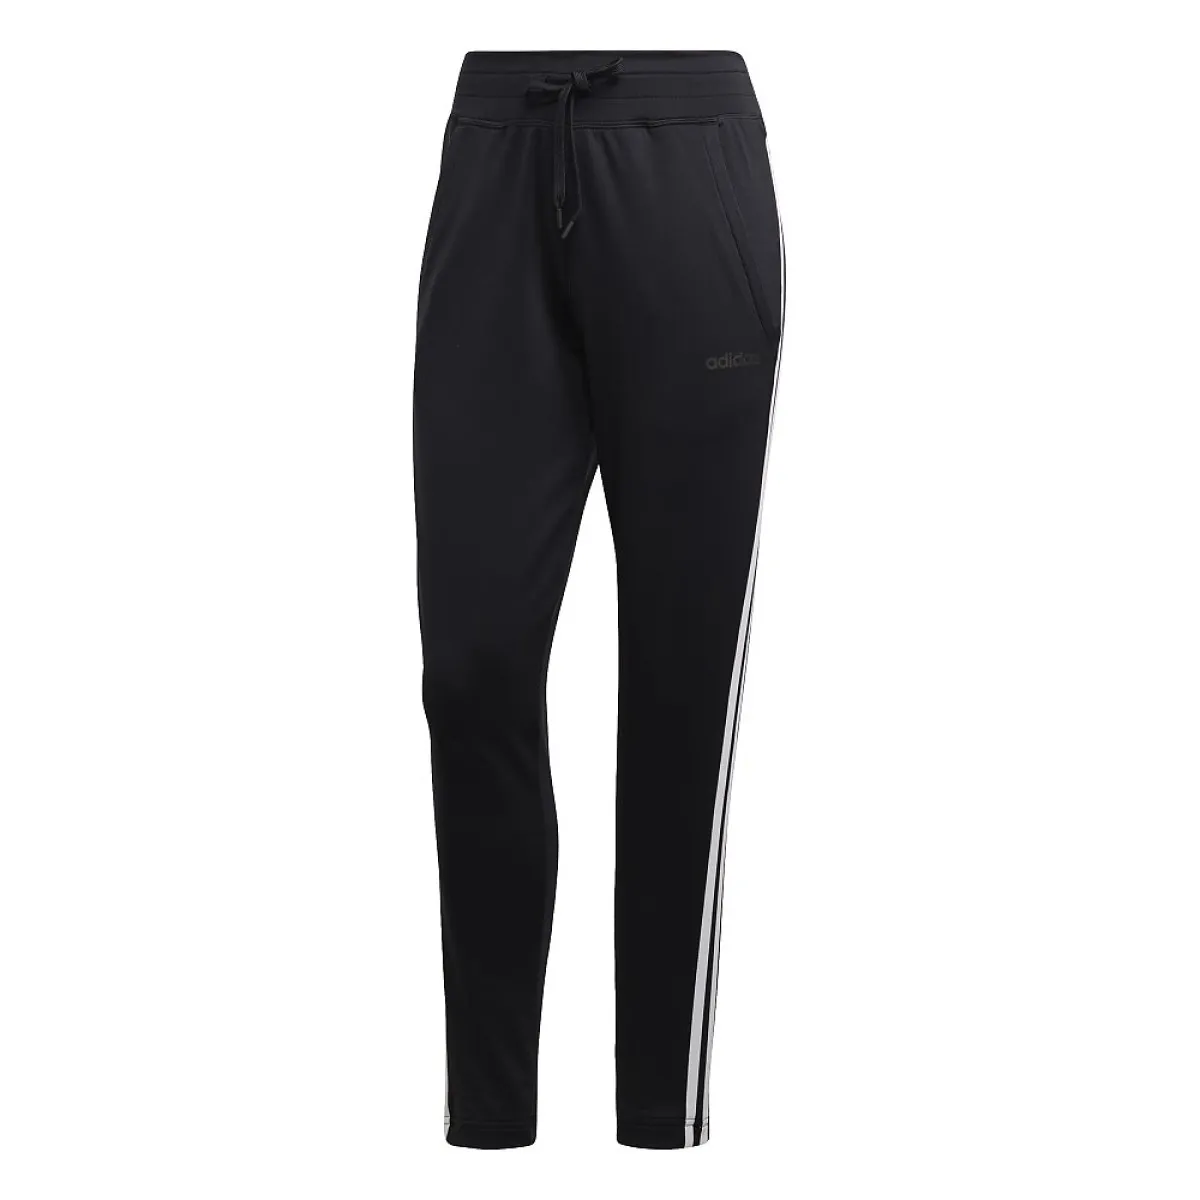 adidas ladies training trousers black with 3 stripes